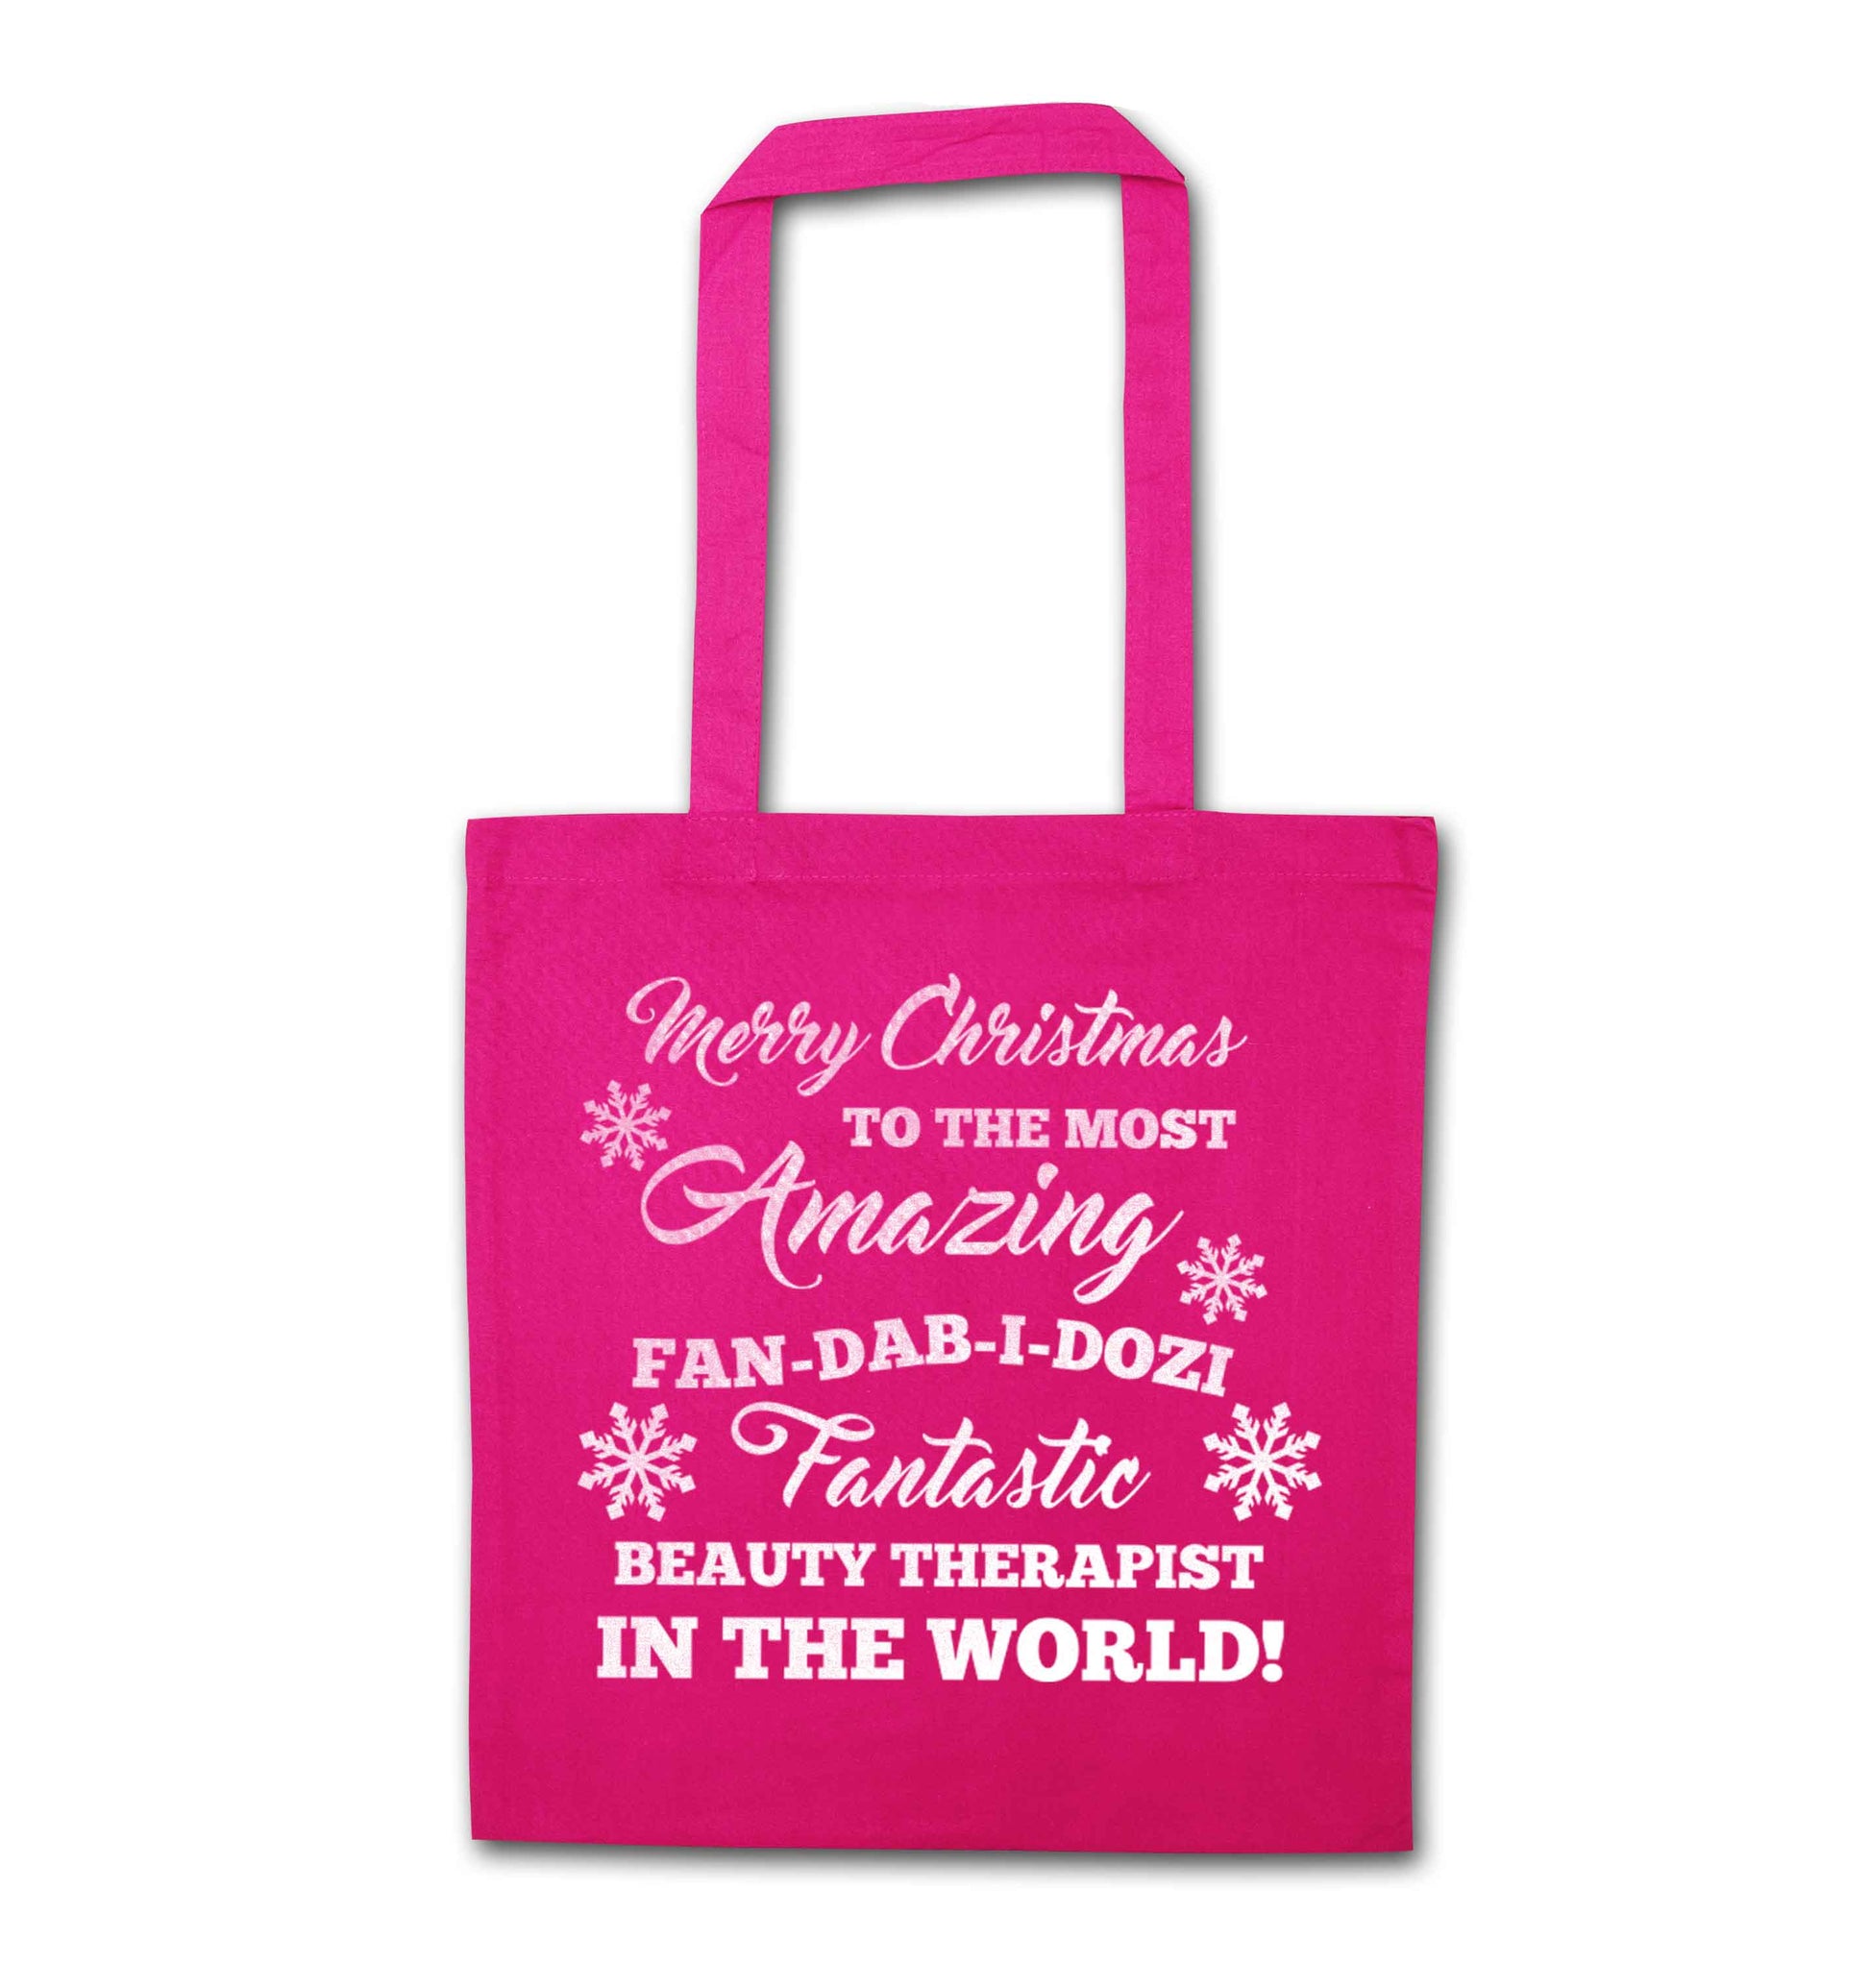 Merry Christmas to the most amazing fan-dab-i-dozi fantasic beauty therapist in the world pink tote bag